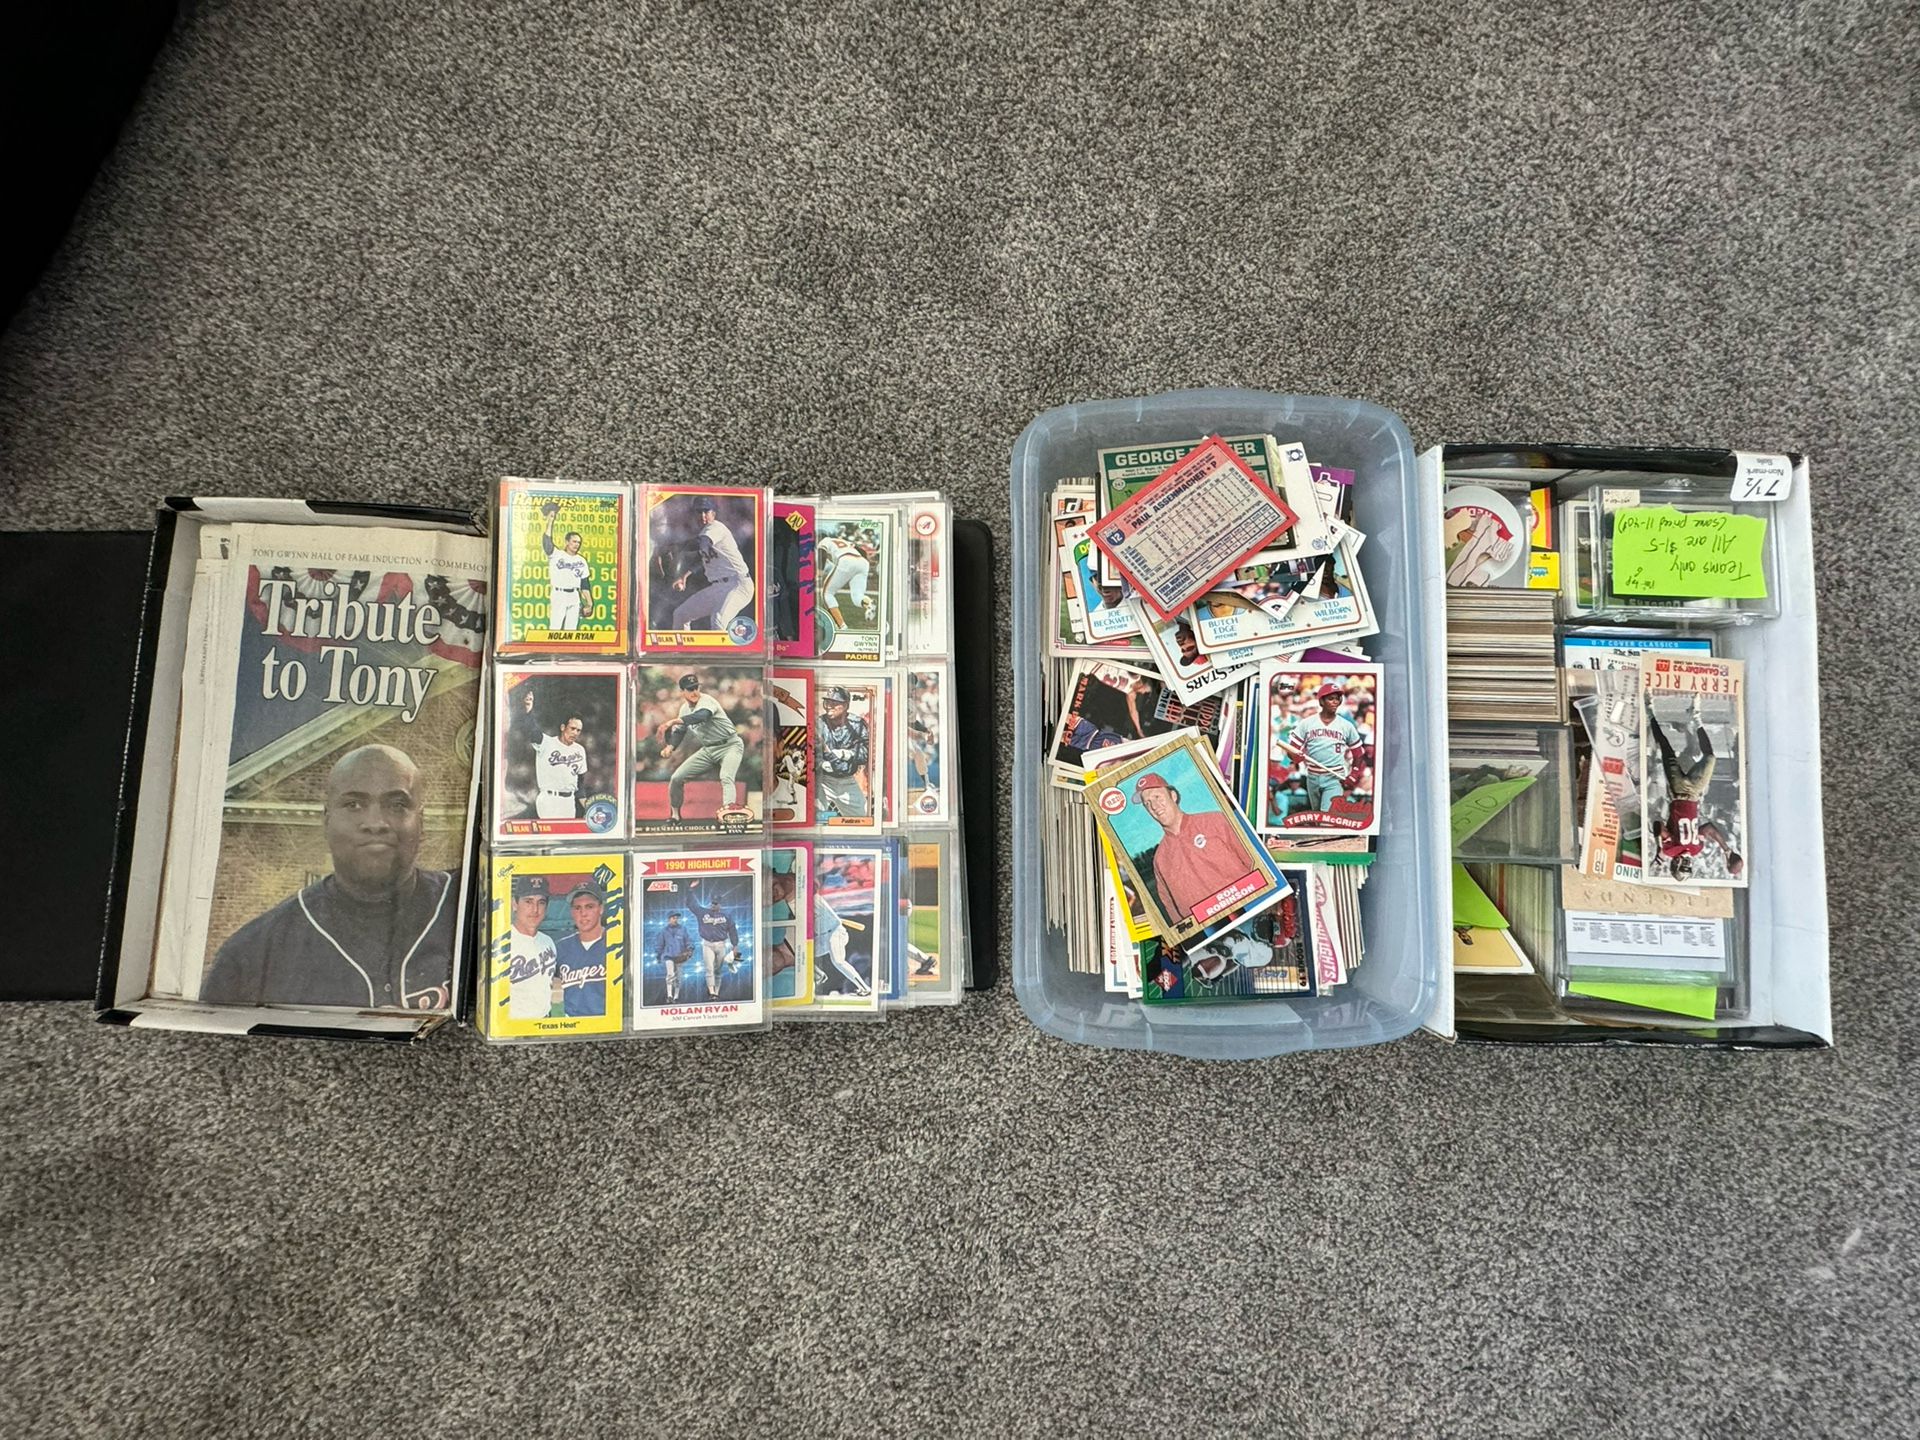 Baseball card collection from '92-'04ish